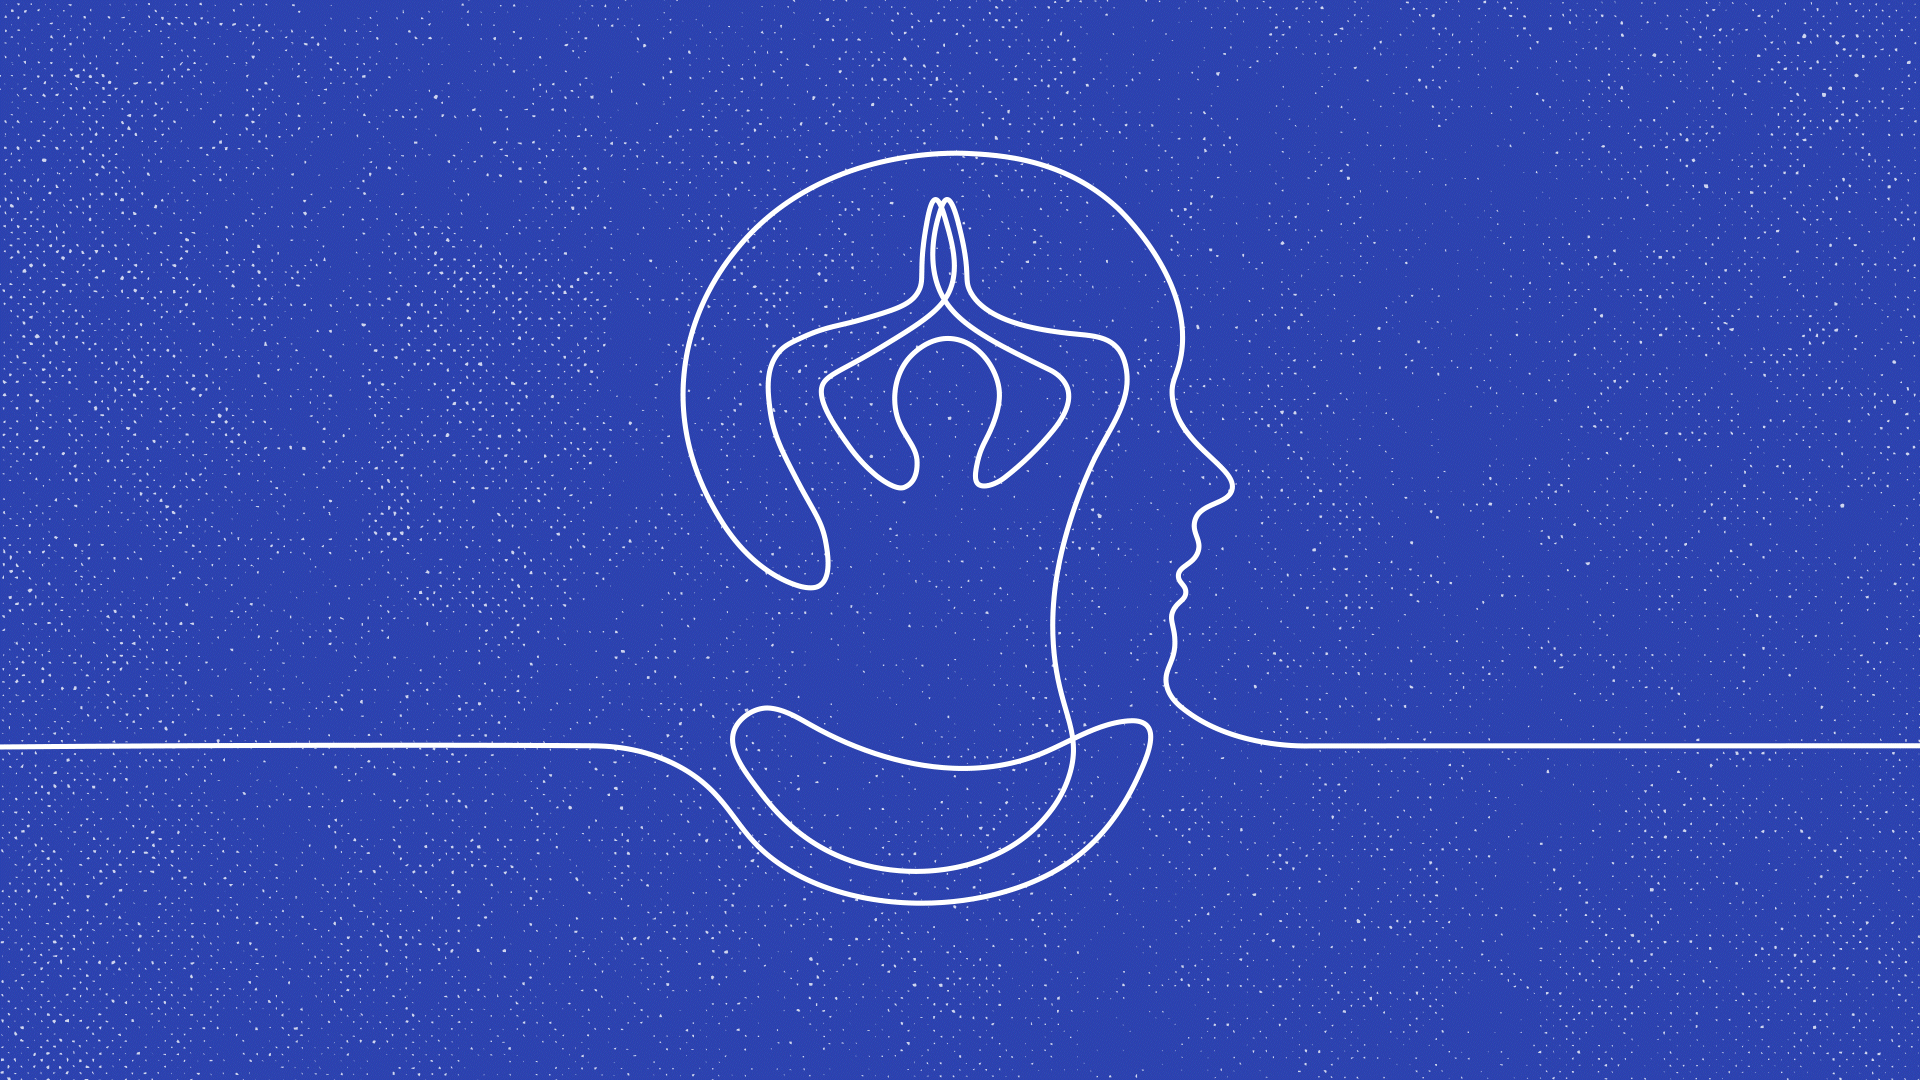 What Is Mindfulness, and How Can It Help You? A Psychologist Explains